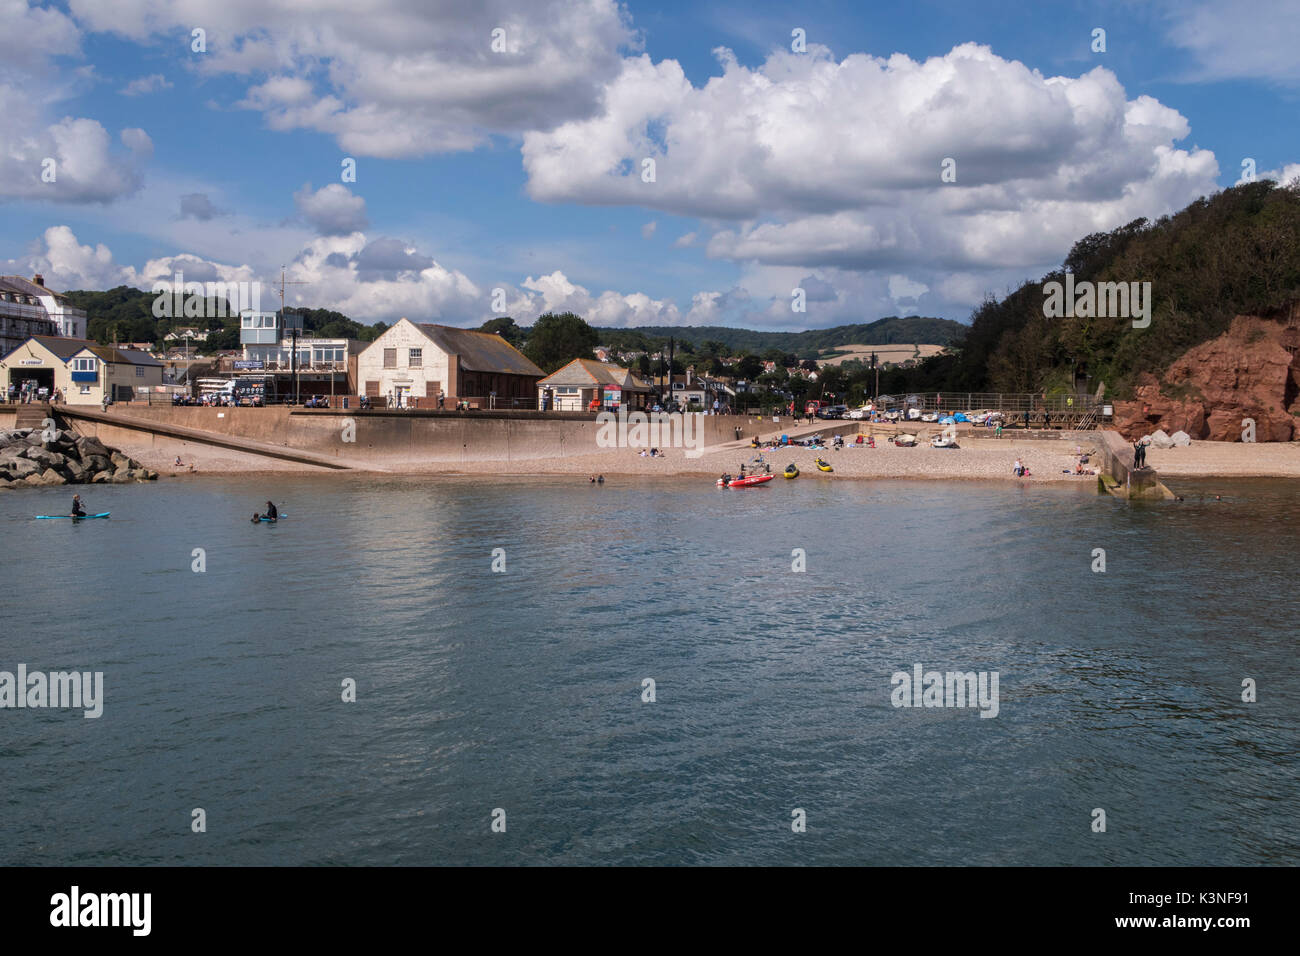 View of the Port Royal area of Sidmouth,now for redevelopment,including the drill hall and sailing club. Stock Photo